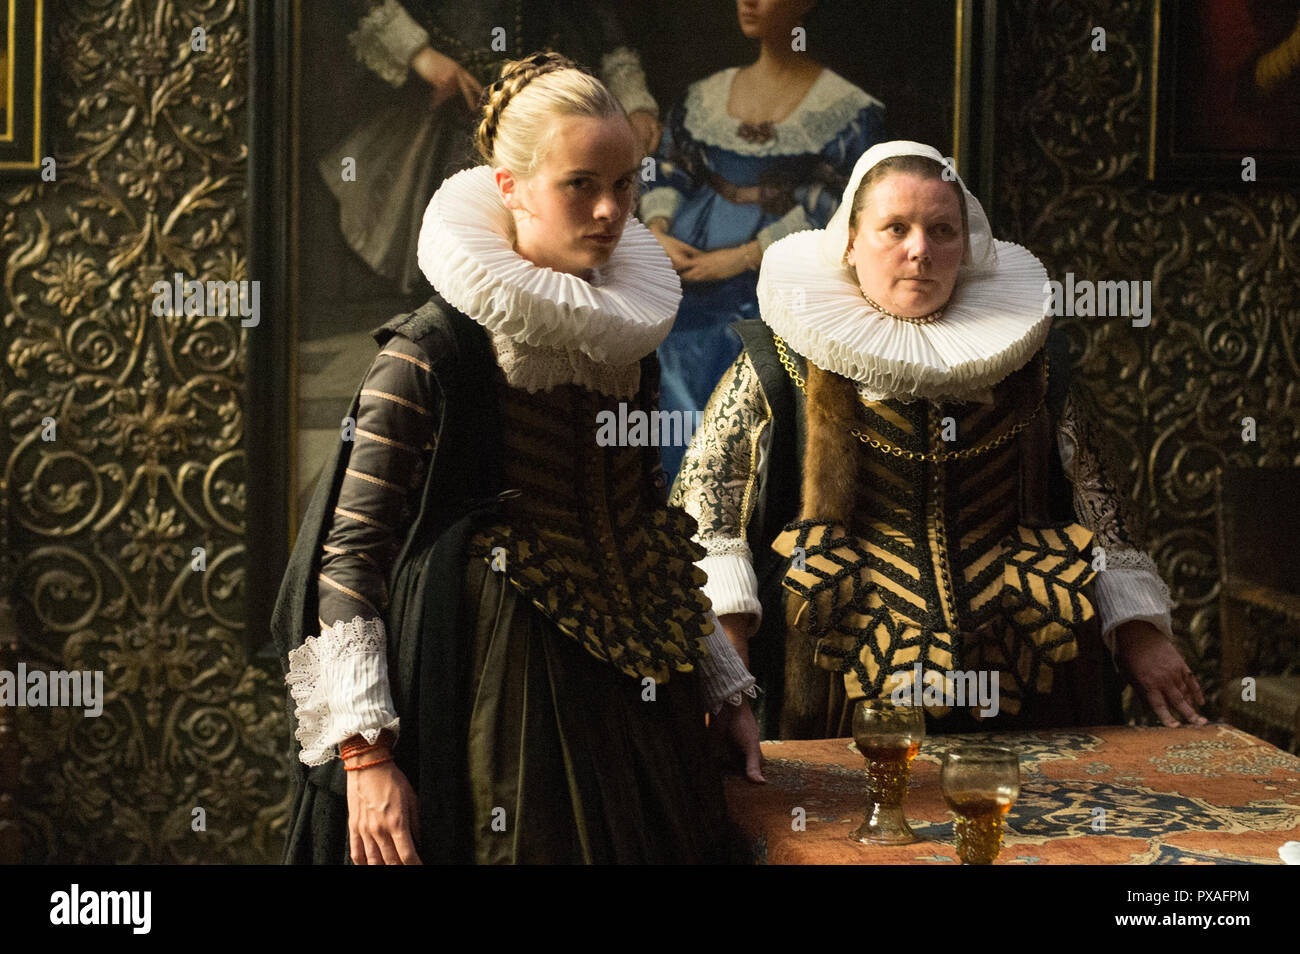 RELEASE DATE: September 1, 2017 TITLE: Tulip Fever STUDIO: Weinstein Company DIRECTOR: Justin Chadwick PLOT: An artist falls for a young married woman while he's commissioned to paint her portrait during the Tulip mania of 17th century Amsterdam STARRING: Judi Dench, Alicia Vikander, Dane DeHaan, Jack O'Connell. (Credit: © Weinstein Company/Entertainment Pictures) Stock Photo